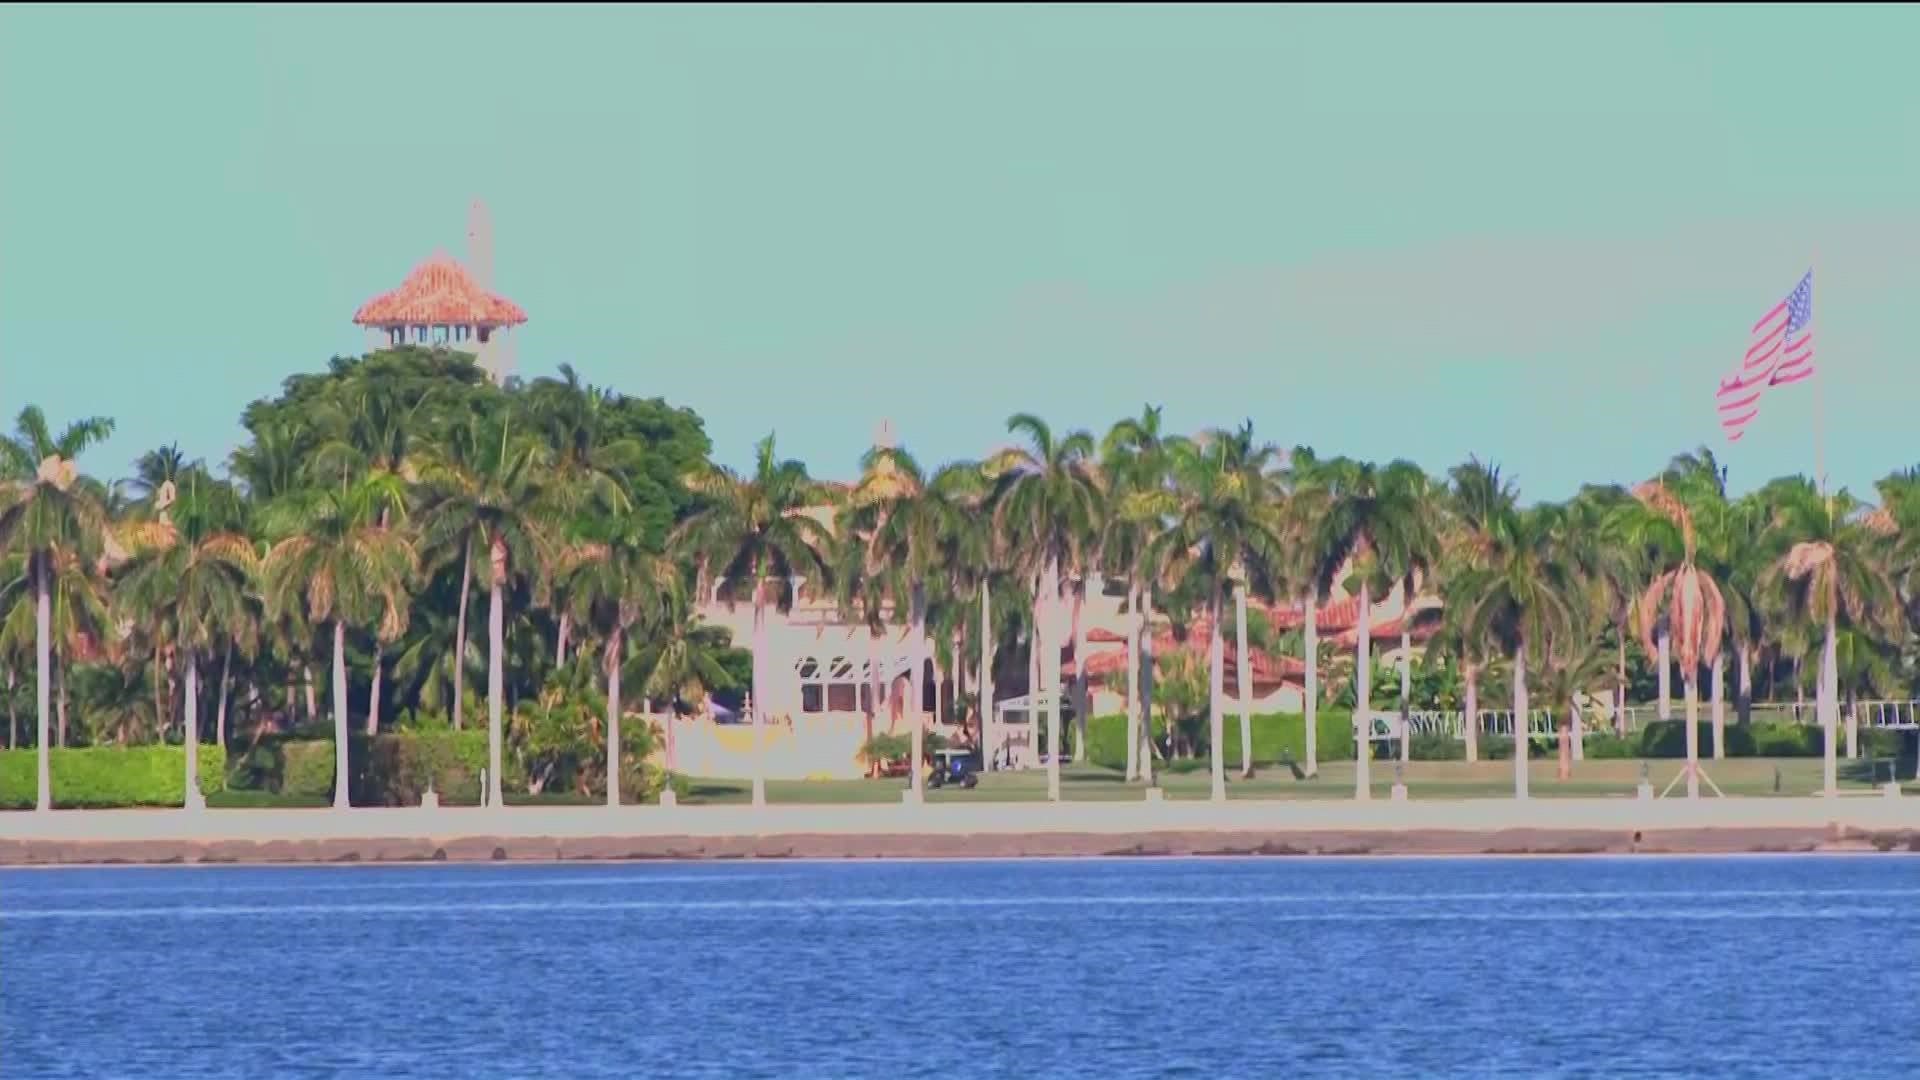 A judge unsealed the search warrant and property receipt from the FBI raid of Trump's Mar-a-Lago residence. The FBI was looking for classified documents in violation